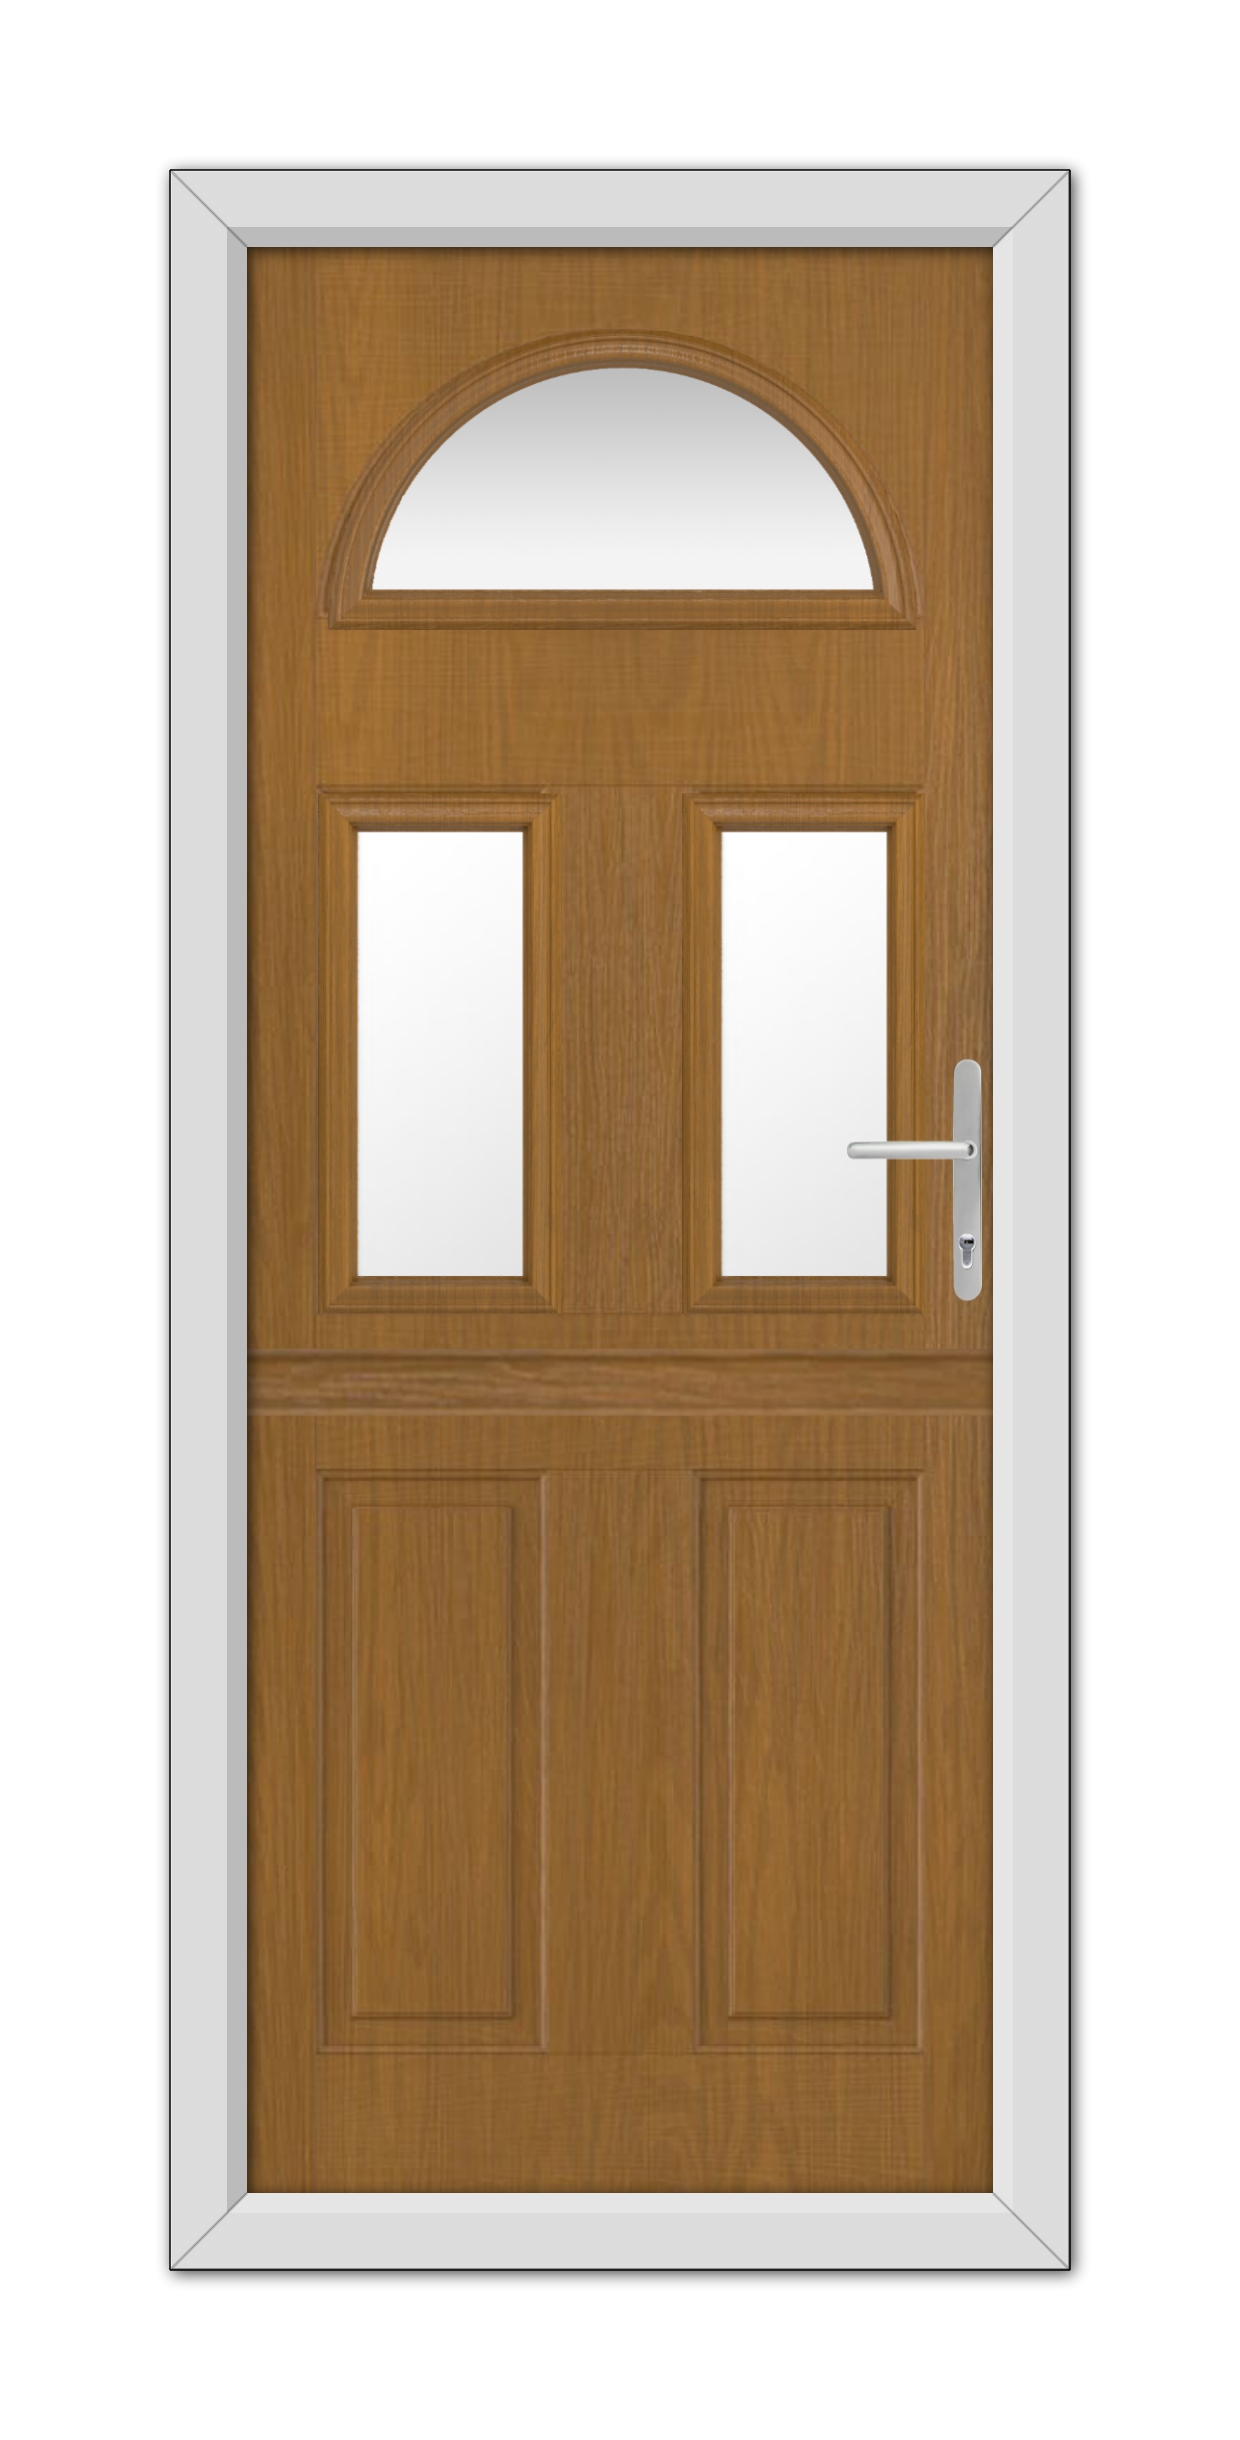 A Oak Winslow 3 Stable Composite Door 48mm Timber Core with a semicircular window at the top, two square windows in the middle, and a metal handle, framed by a white doorframe.